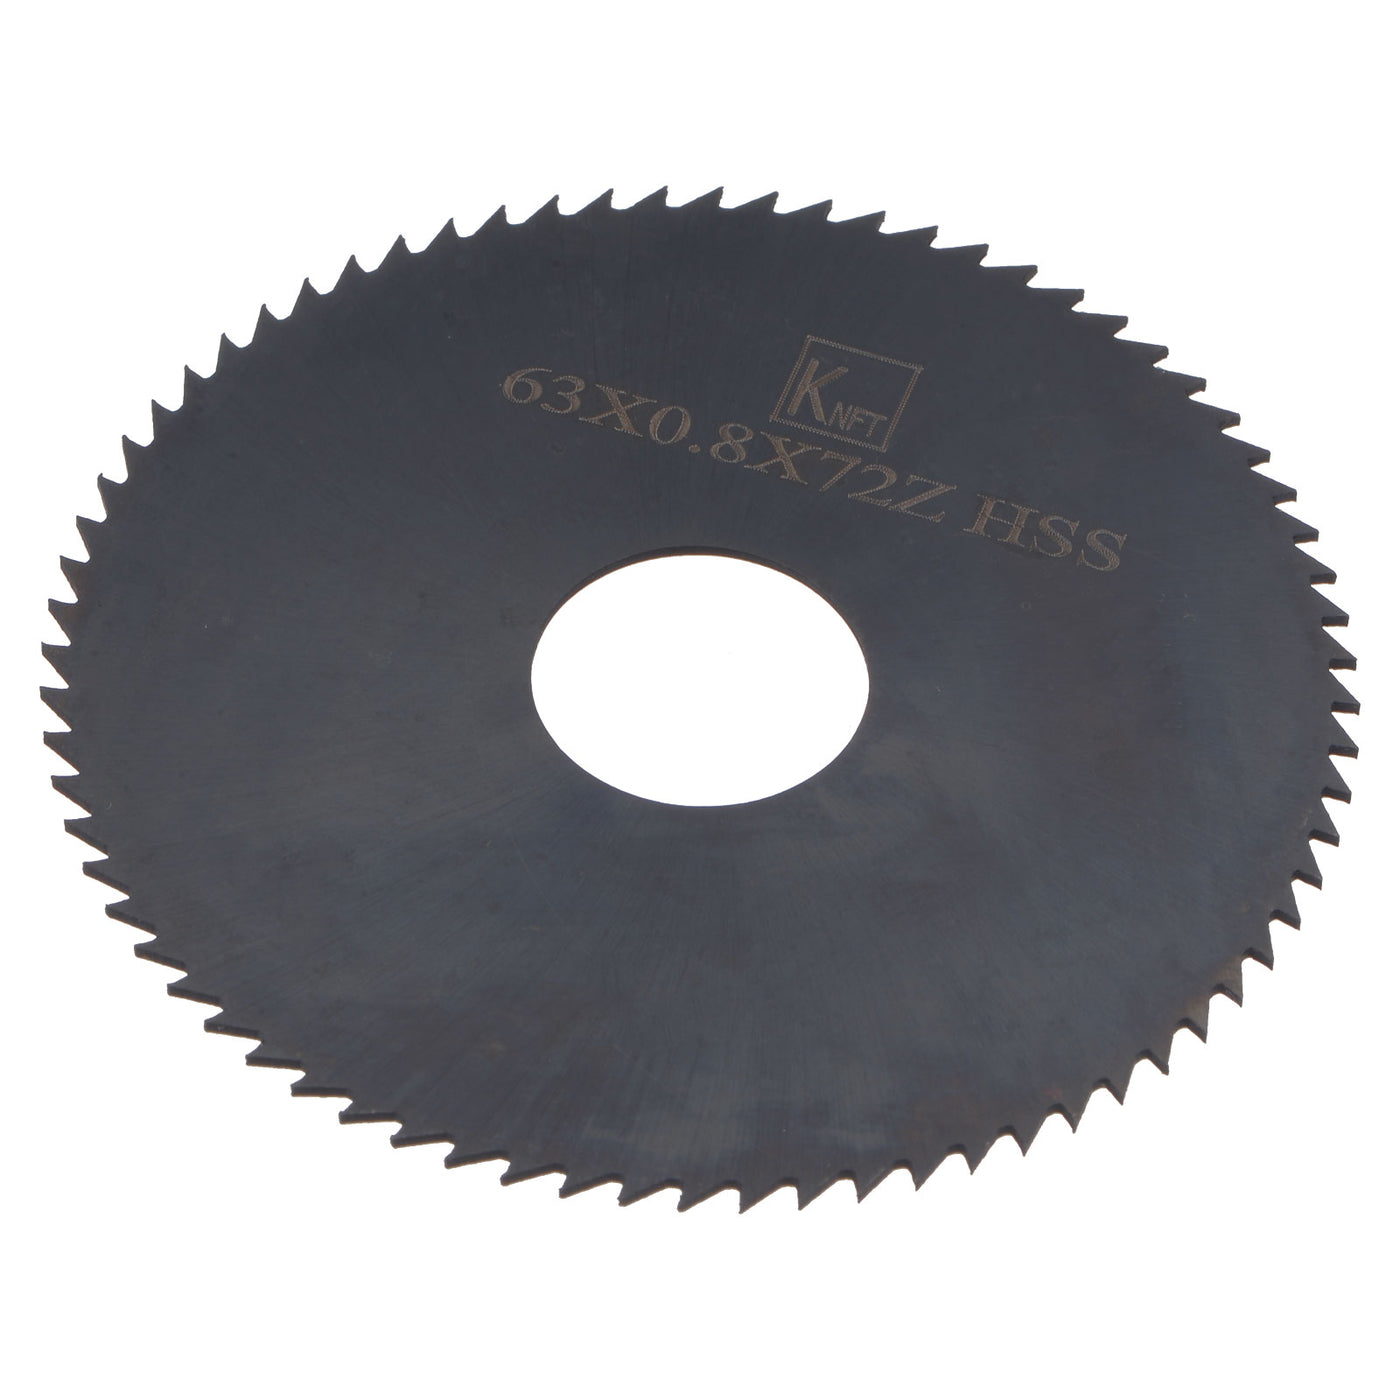 Uxcell Uxcell 60mm Dia 16mm Arbor 1mm Thick 72 Tooth Nitriding Circular Saw Blade Cutter